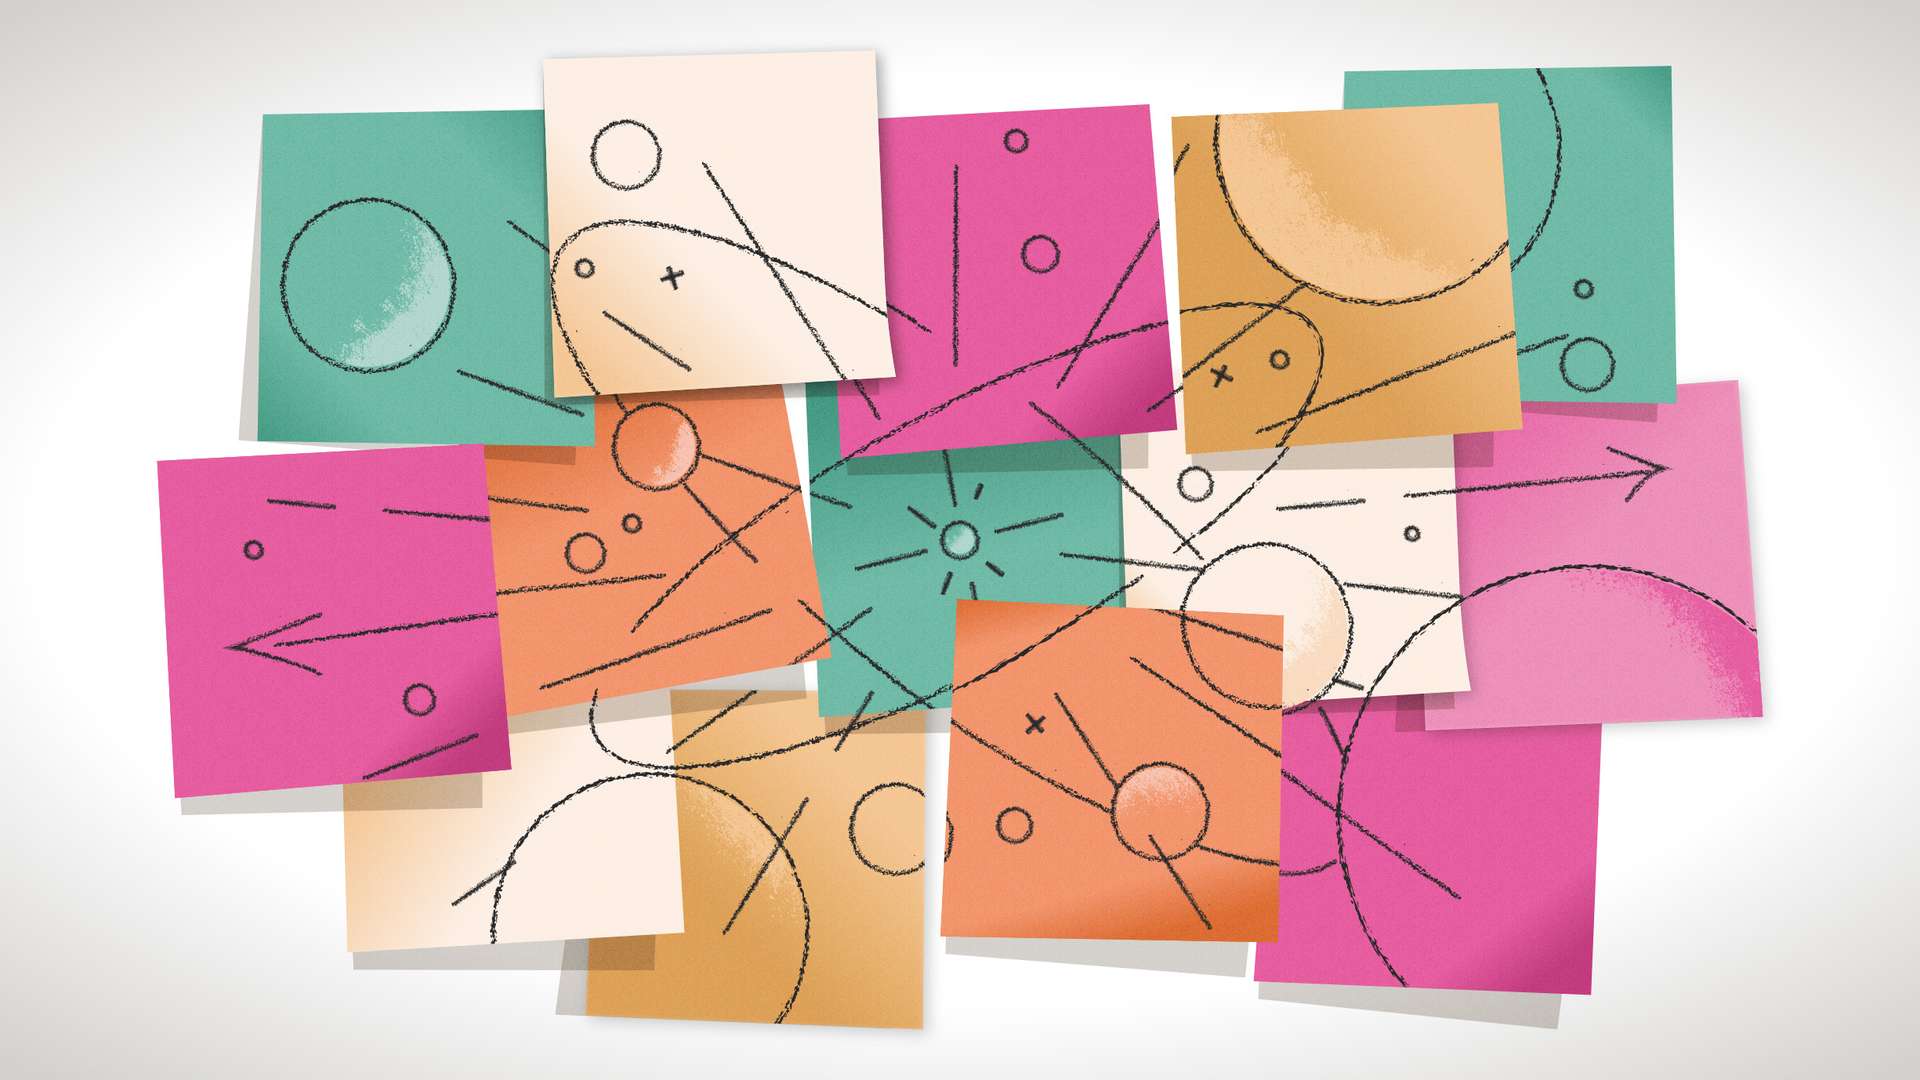 Black line-drawings on a collage of multicolored sticky notes combine to reveal orbs and neutron shapes.